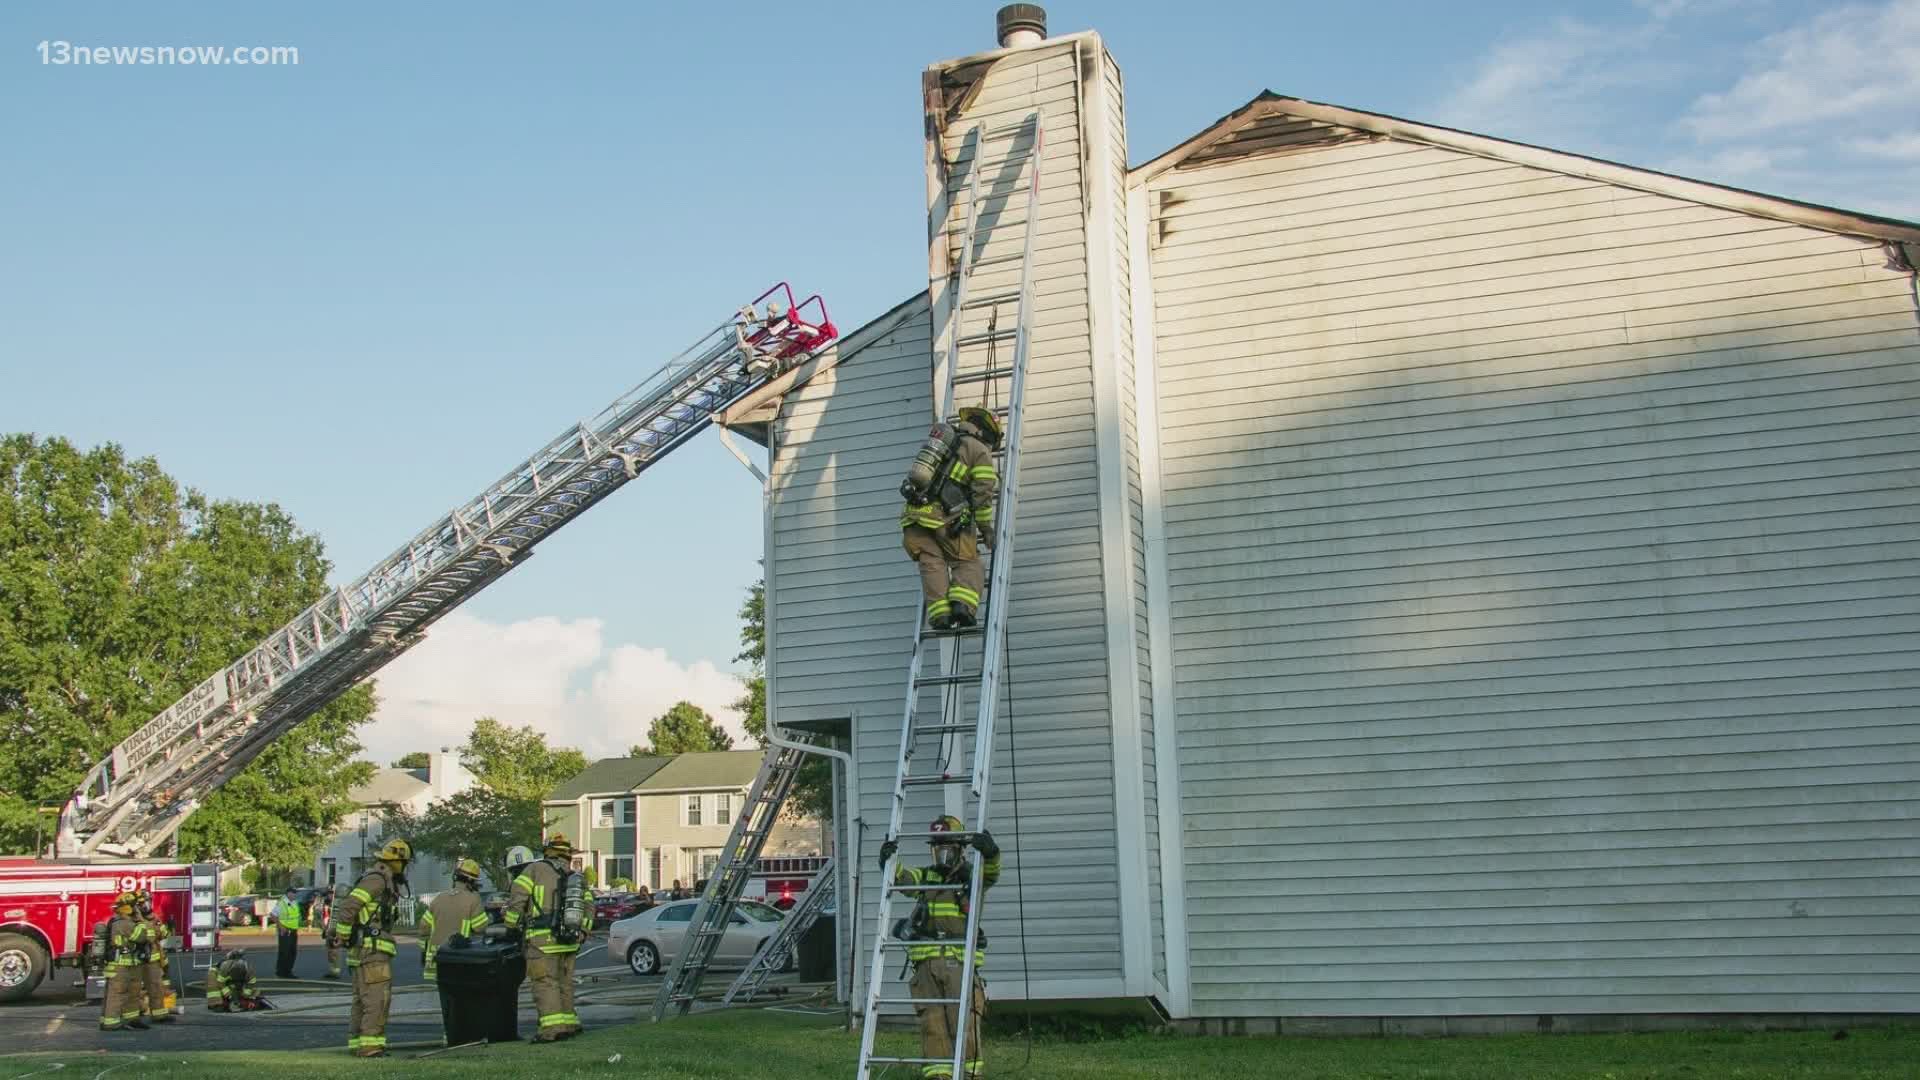 A report from the fire department said the fire was concentrated near the back of the town homes on Netherland Court, and was put out within 25 minutes.